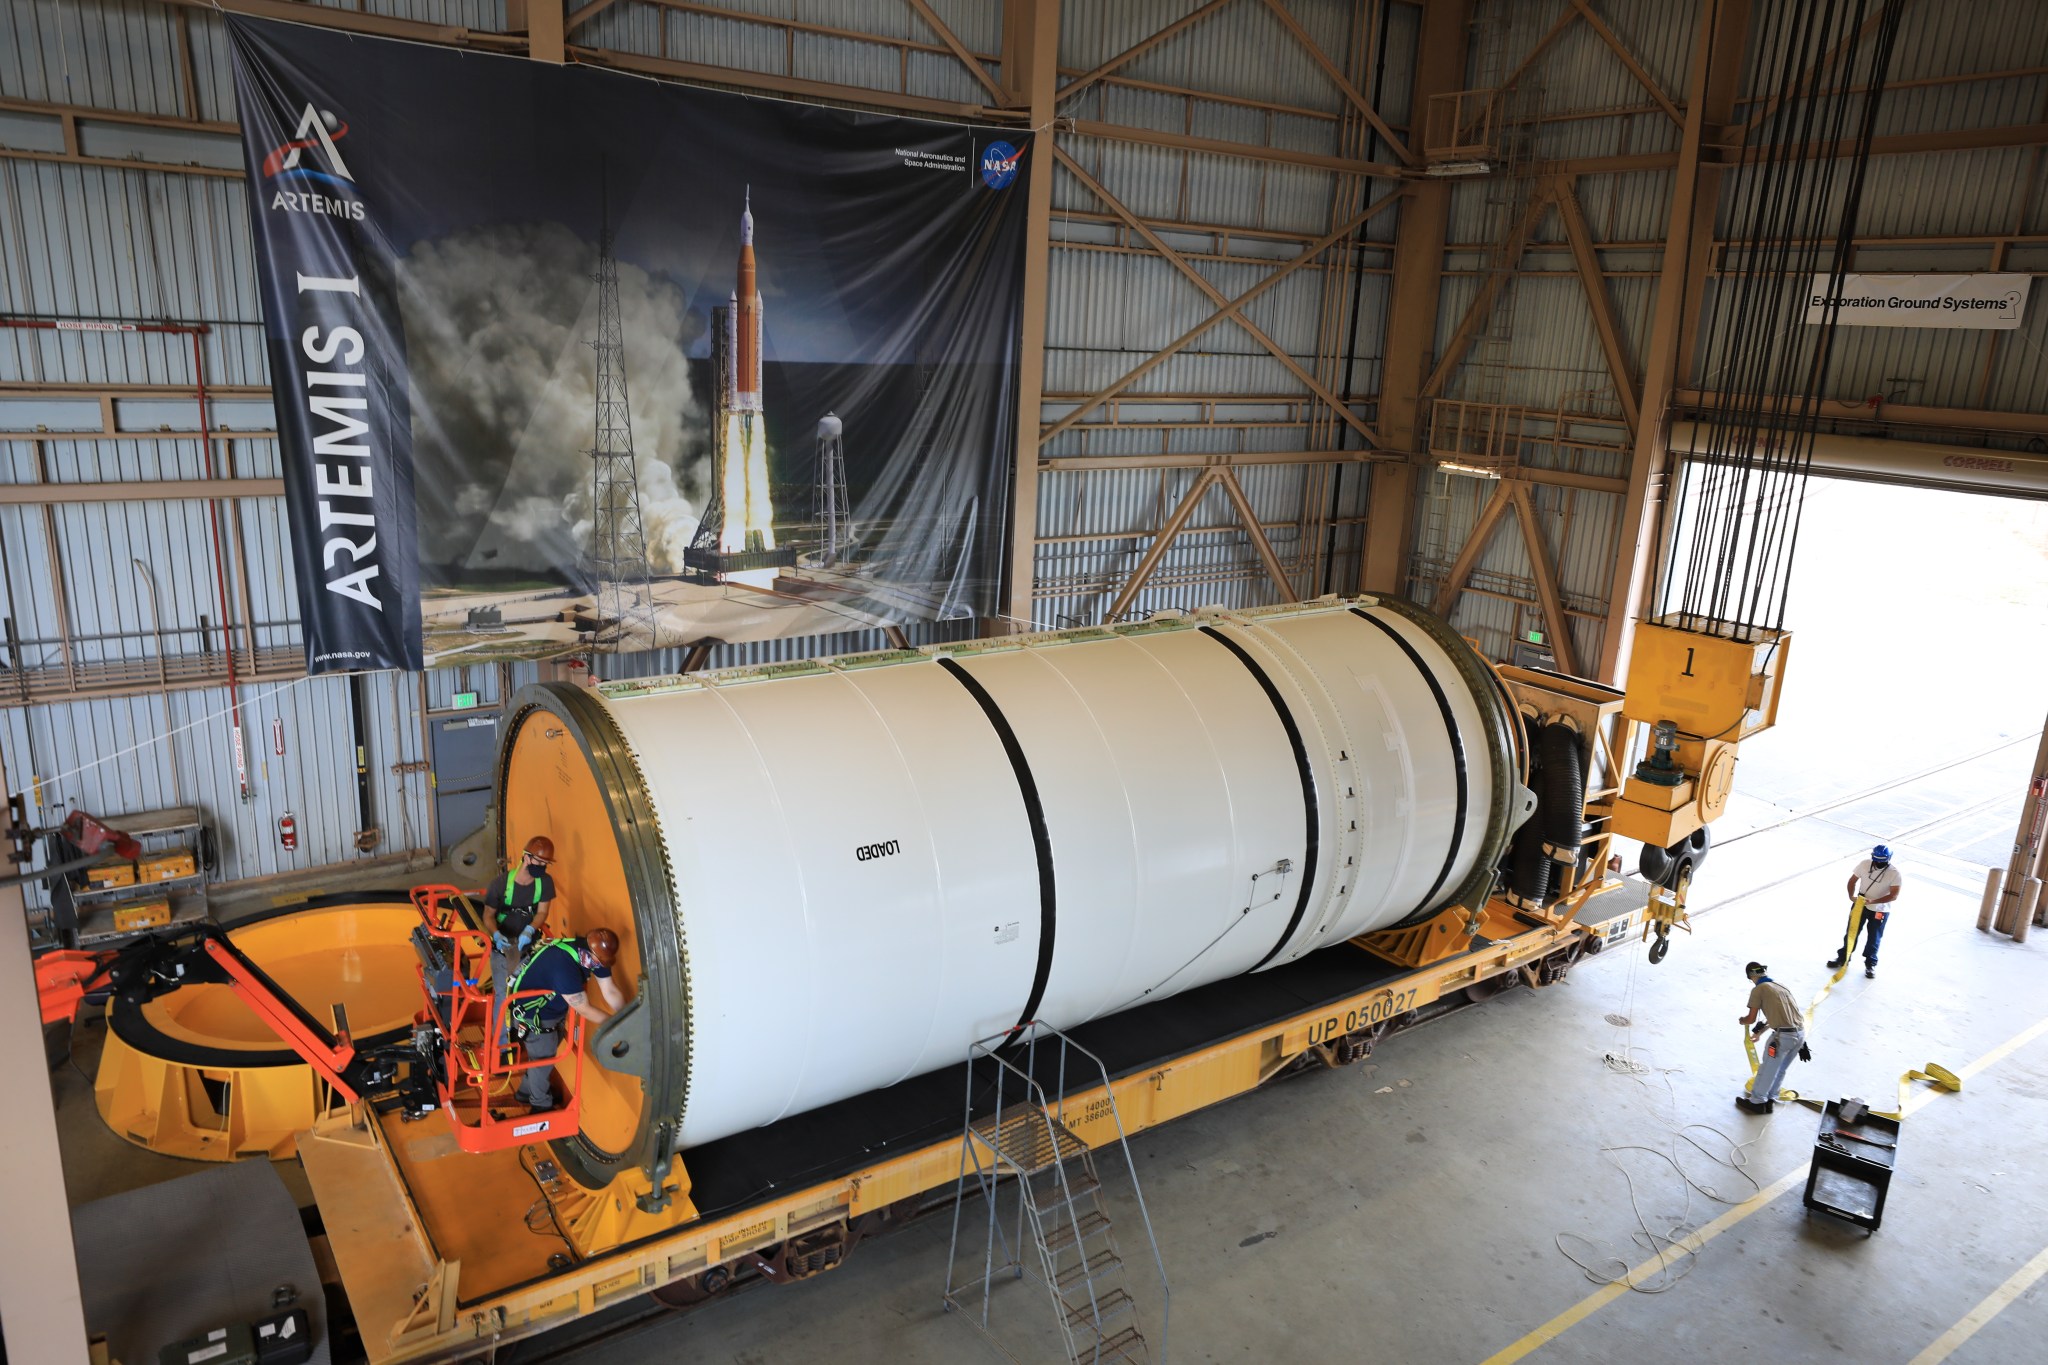 The Space Launch System (SLS) rocket booster segments